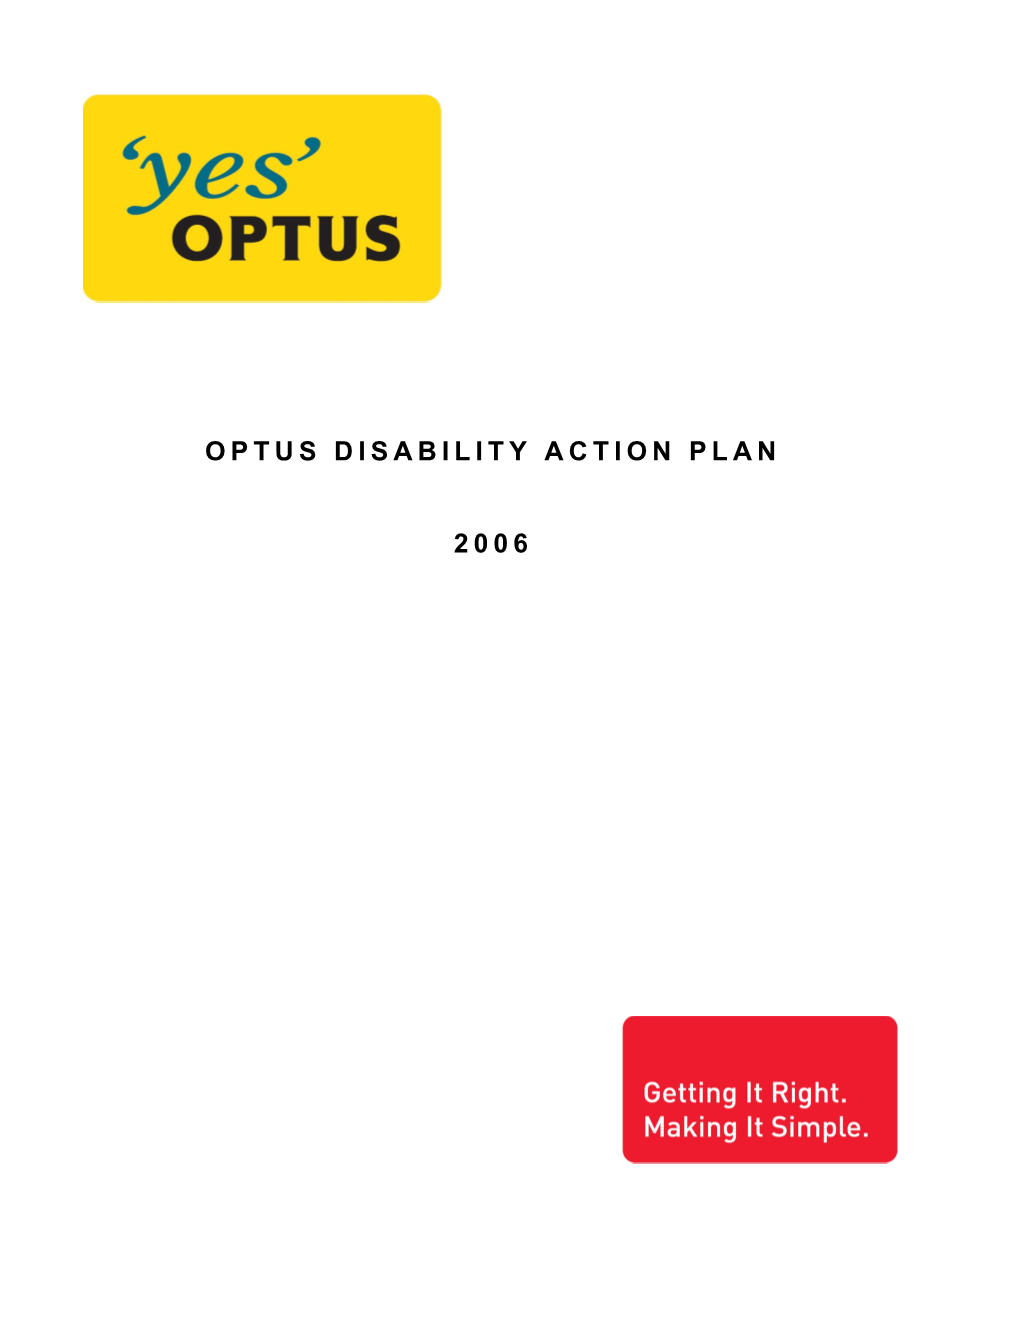 Areas to Be Covered by Optusí Disability Action Plan